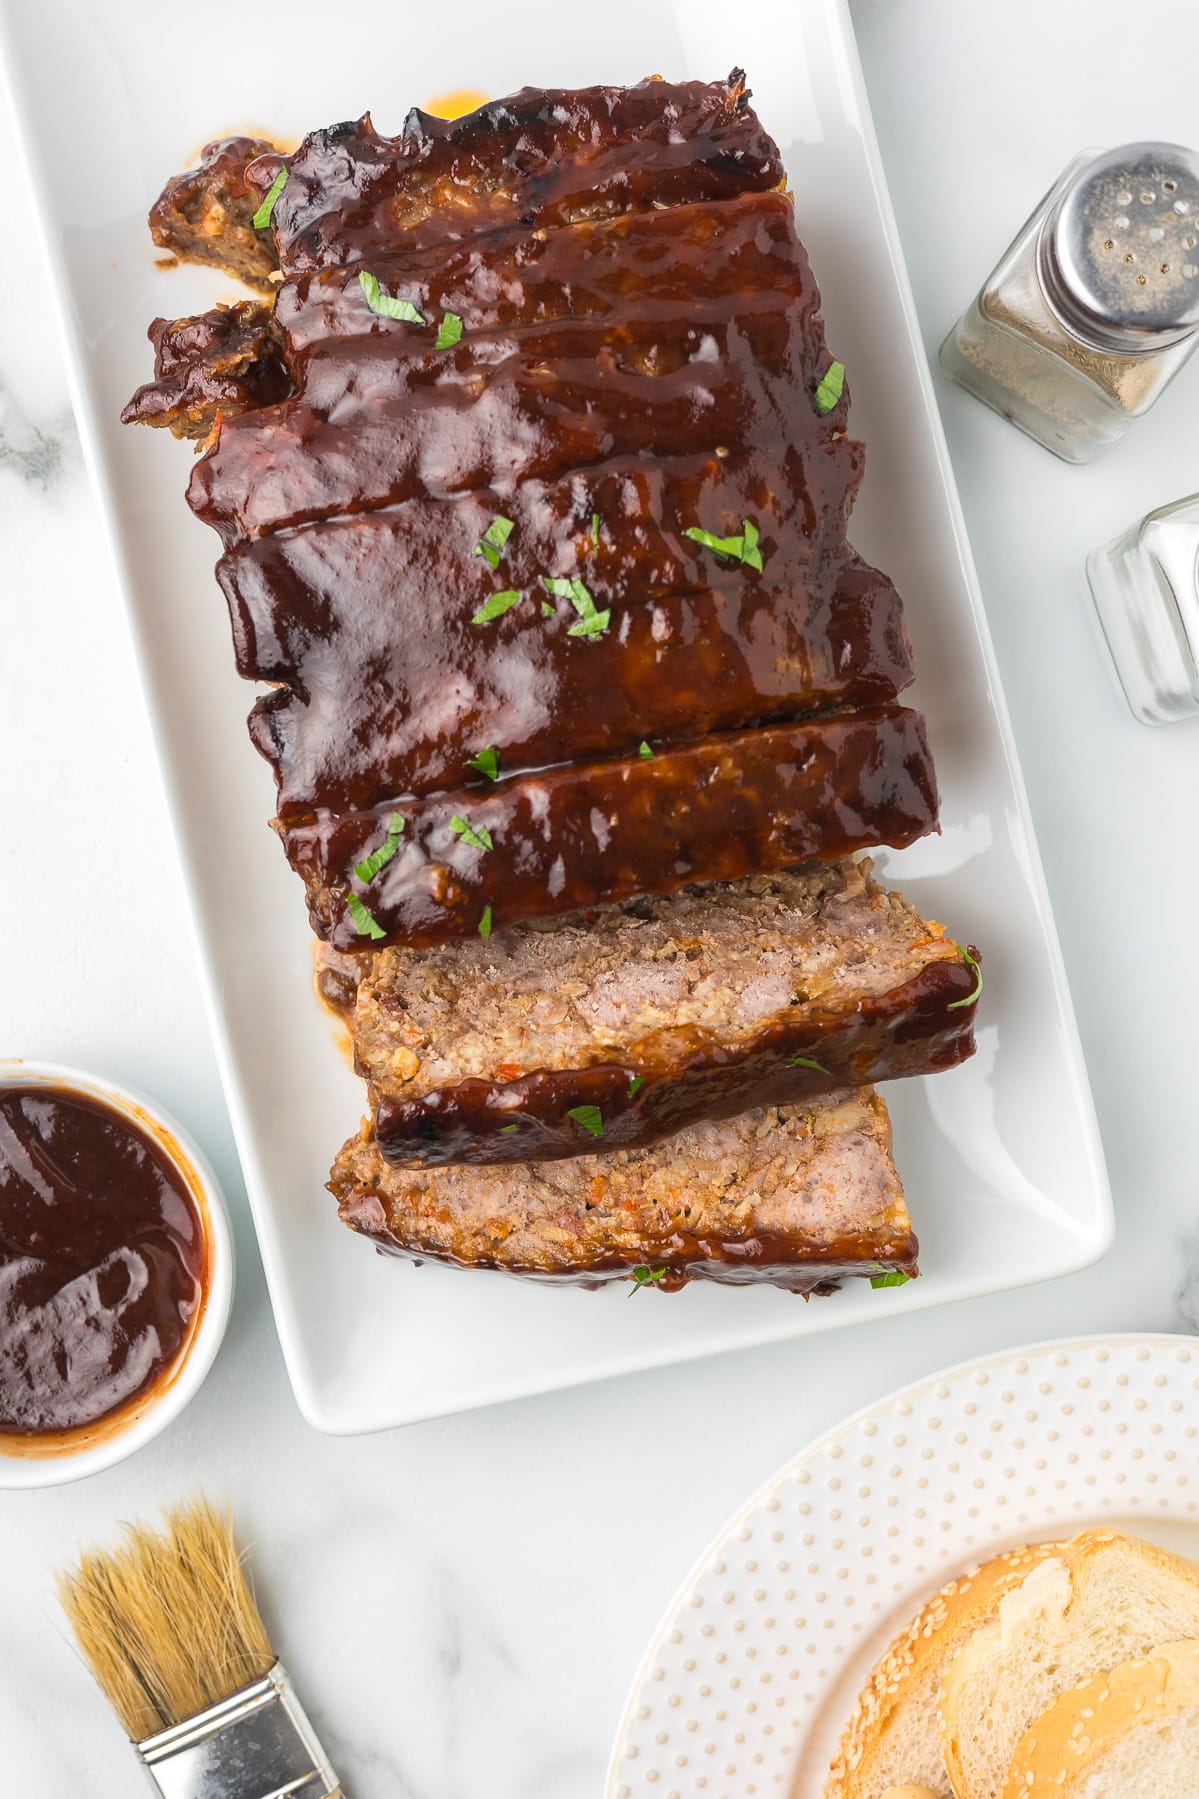 Meatloaf with a bbq sauce glaze.